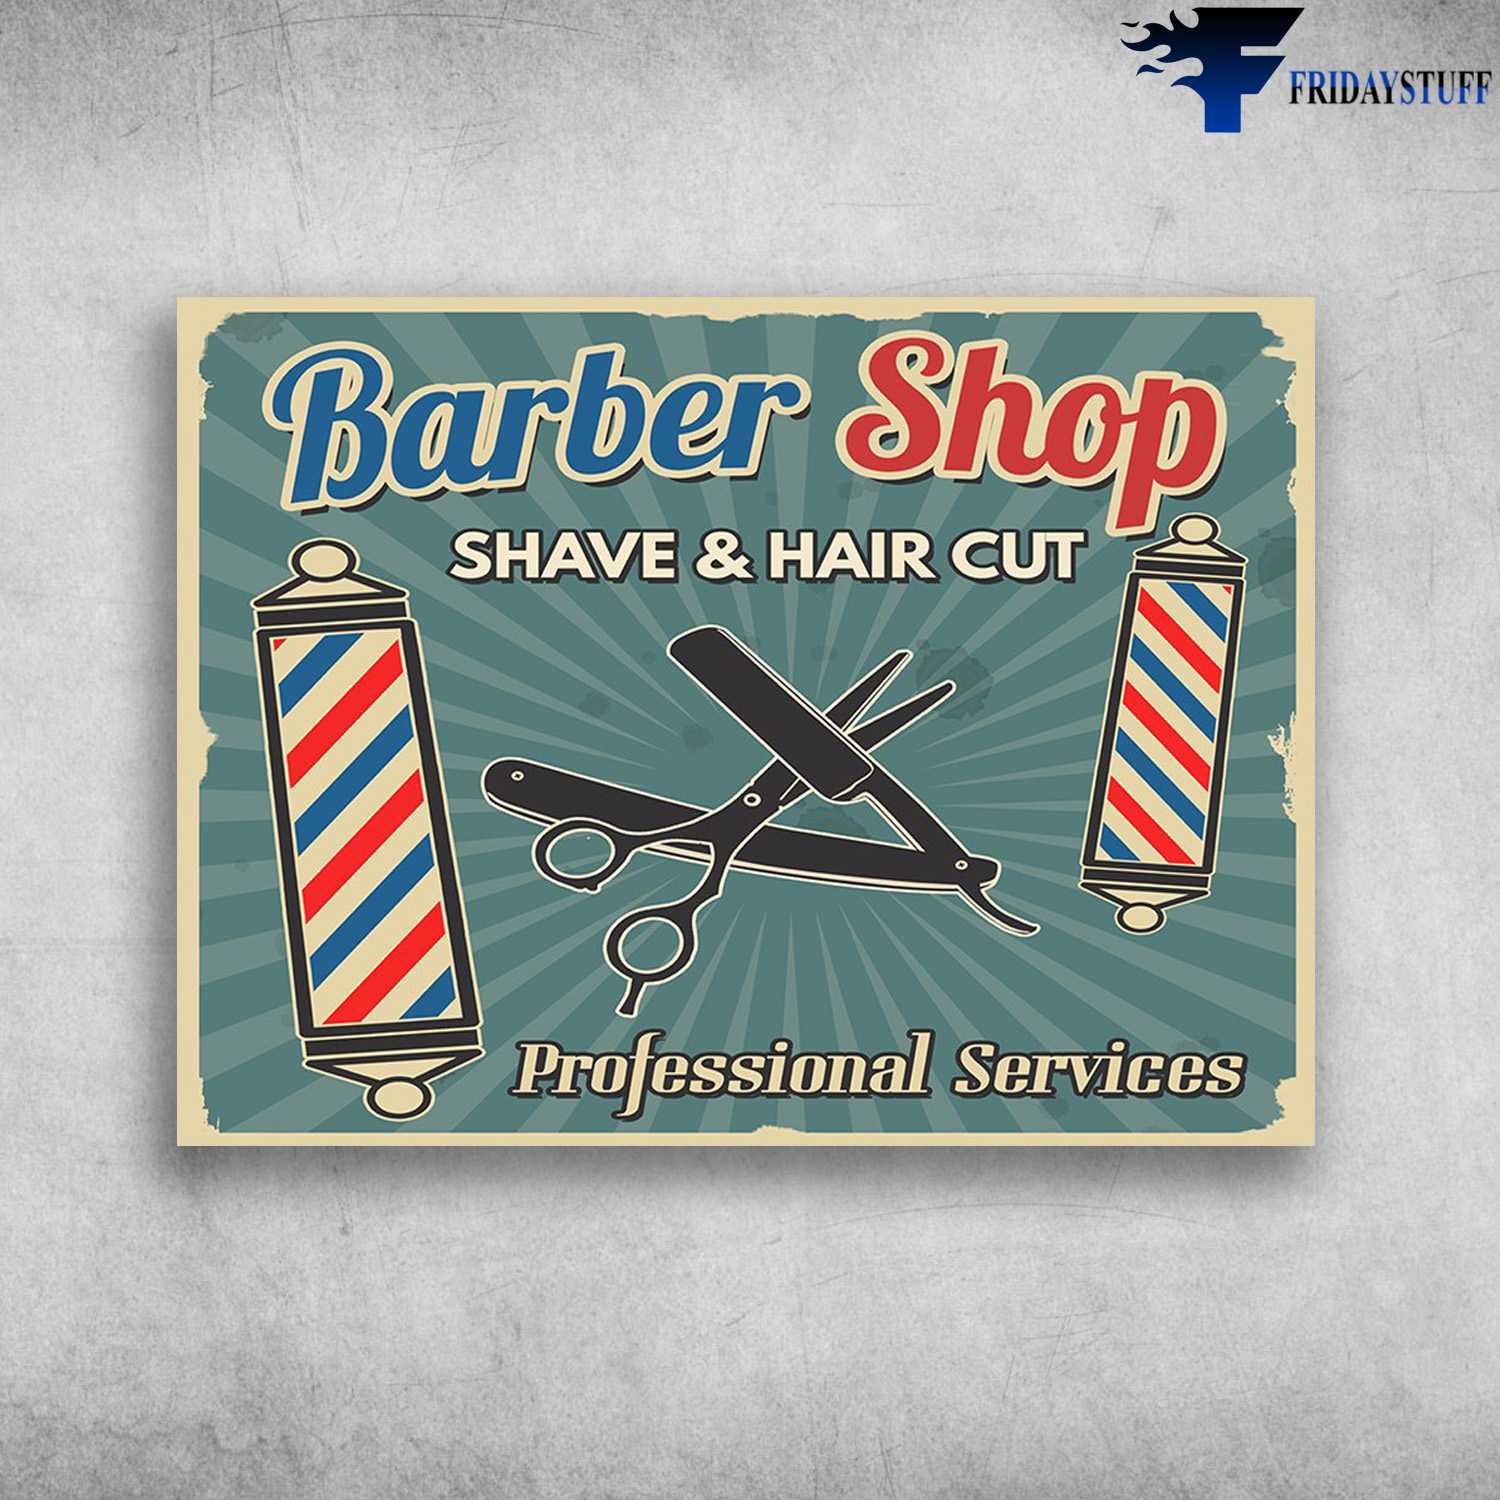 Baber Shop Poster - Shave And Hair Cut, Propessional Services